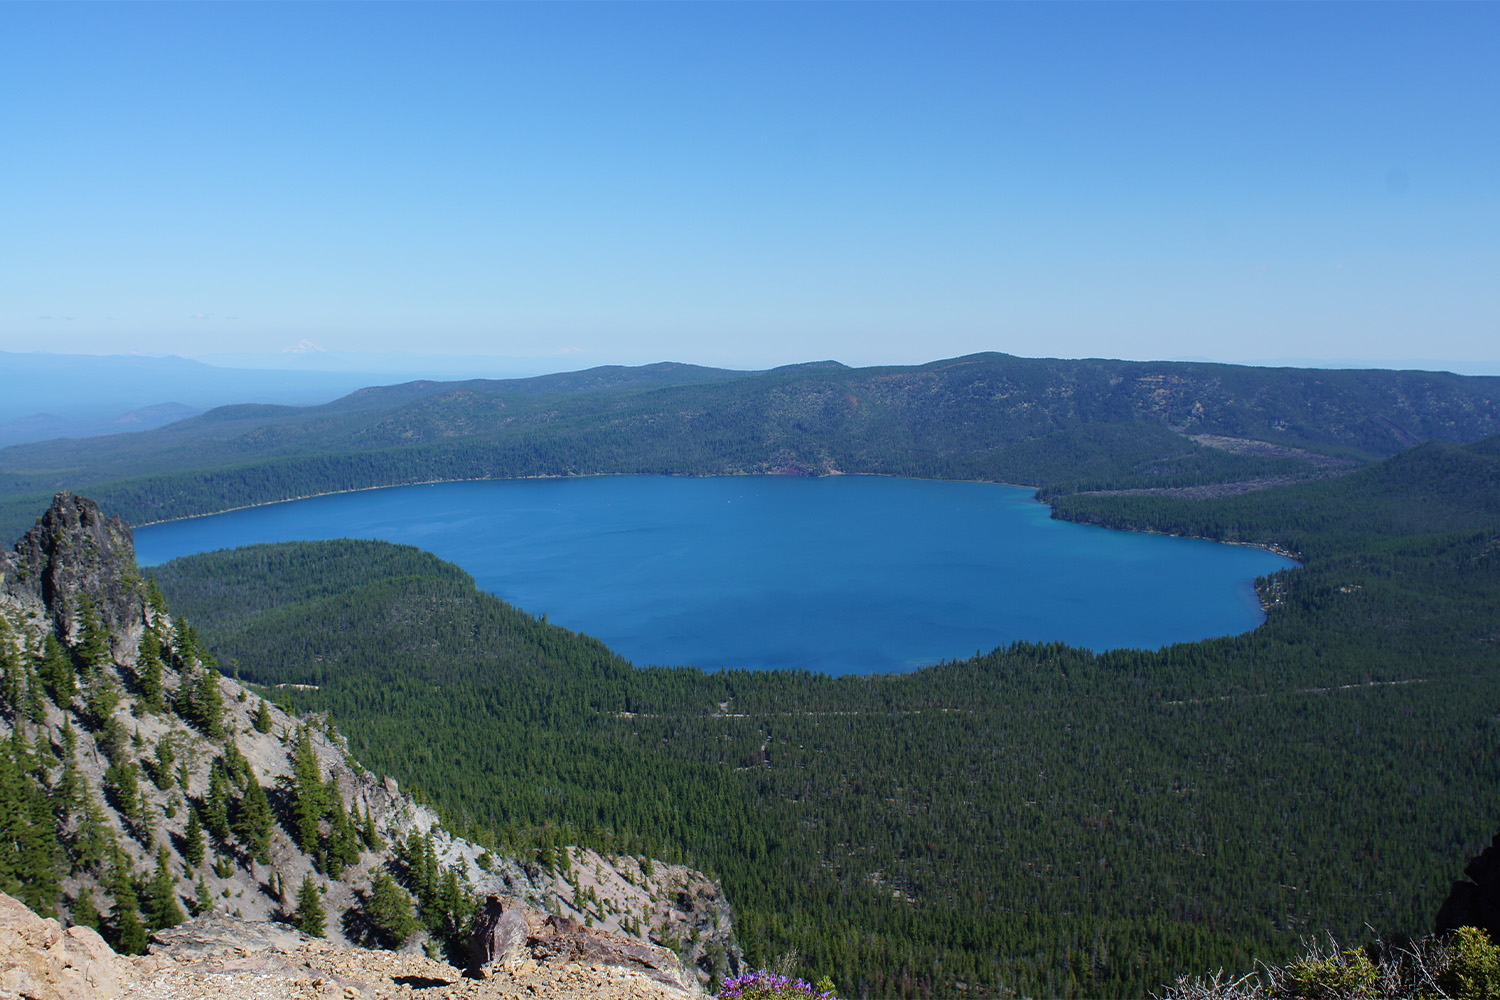 View of Newberry Volcano National Park, seen from a rock ledge. Phot includes view of crater lake.